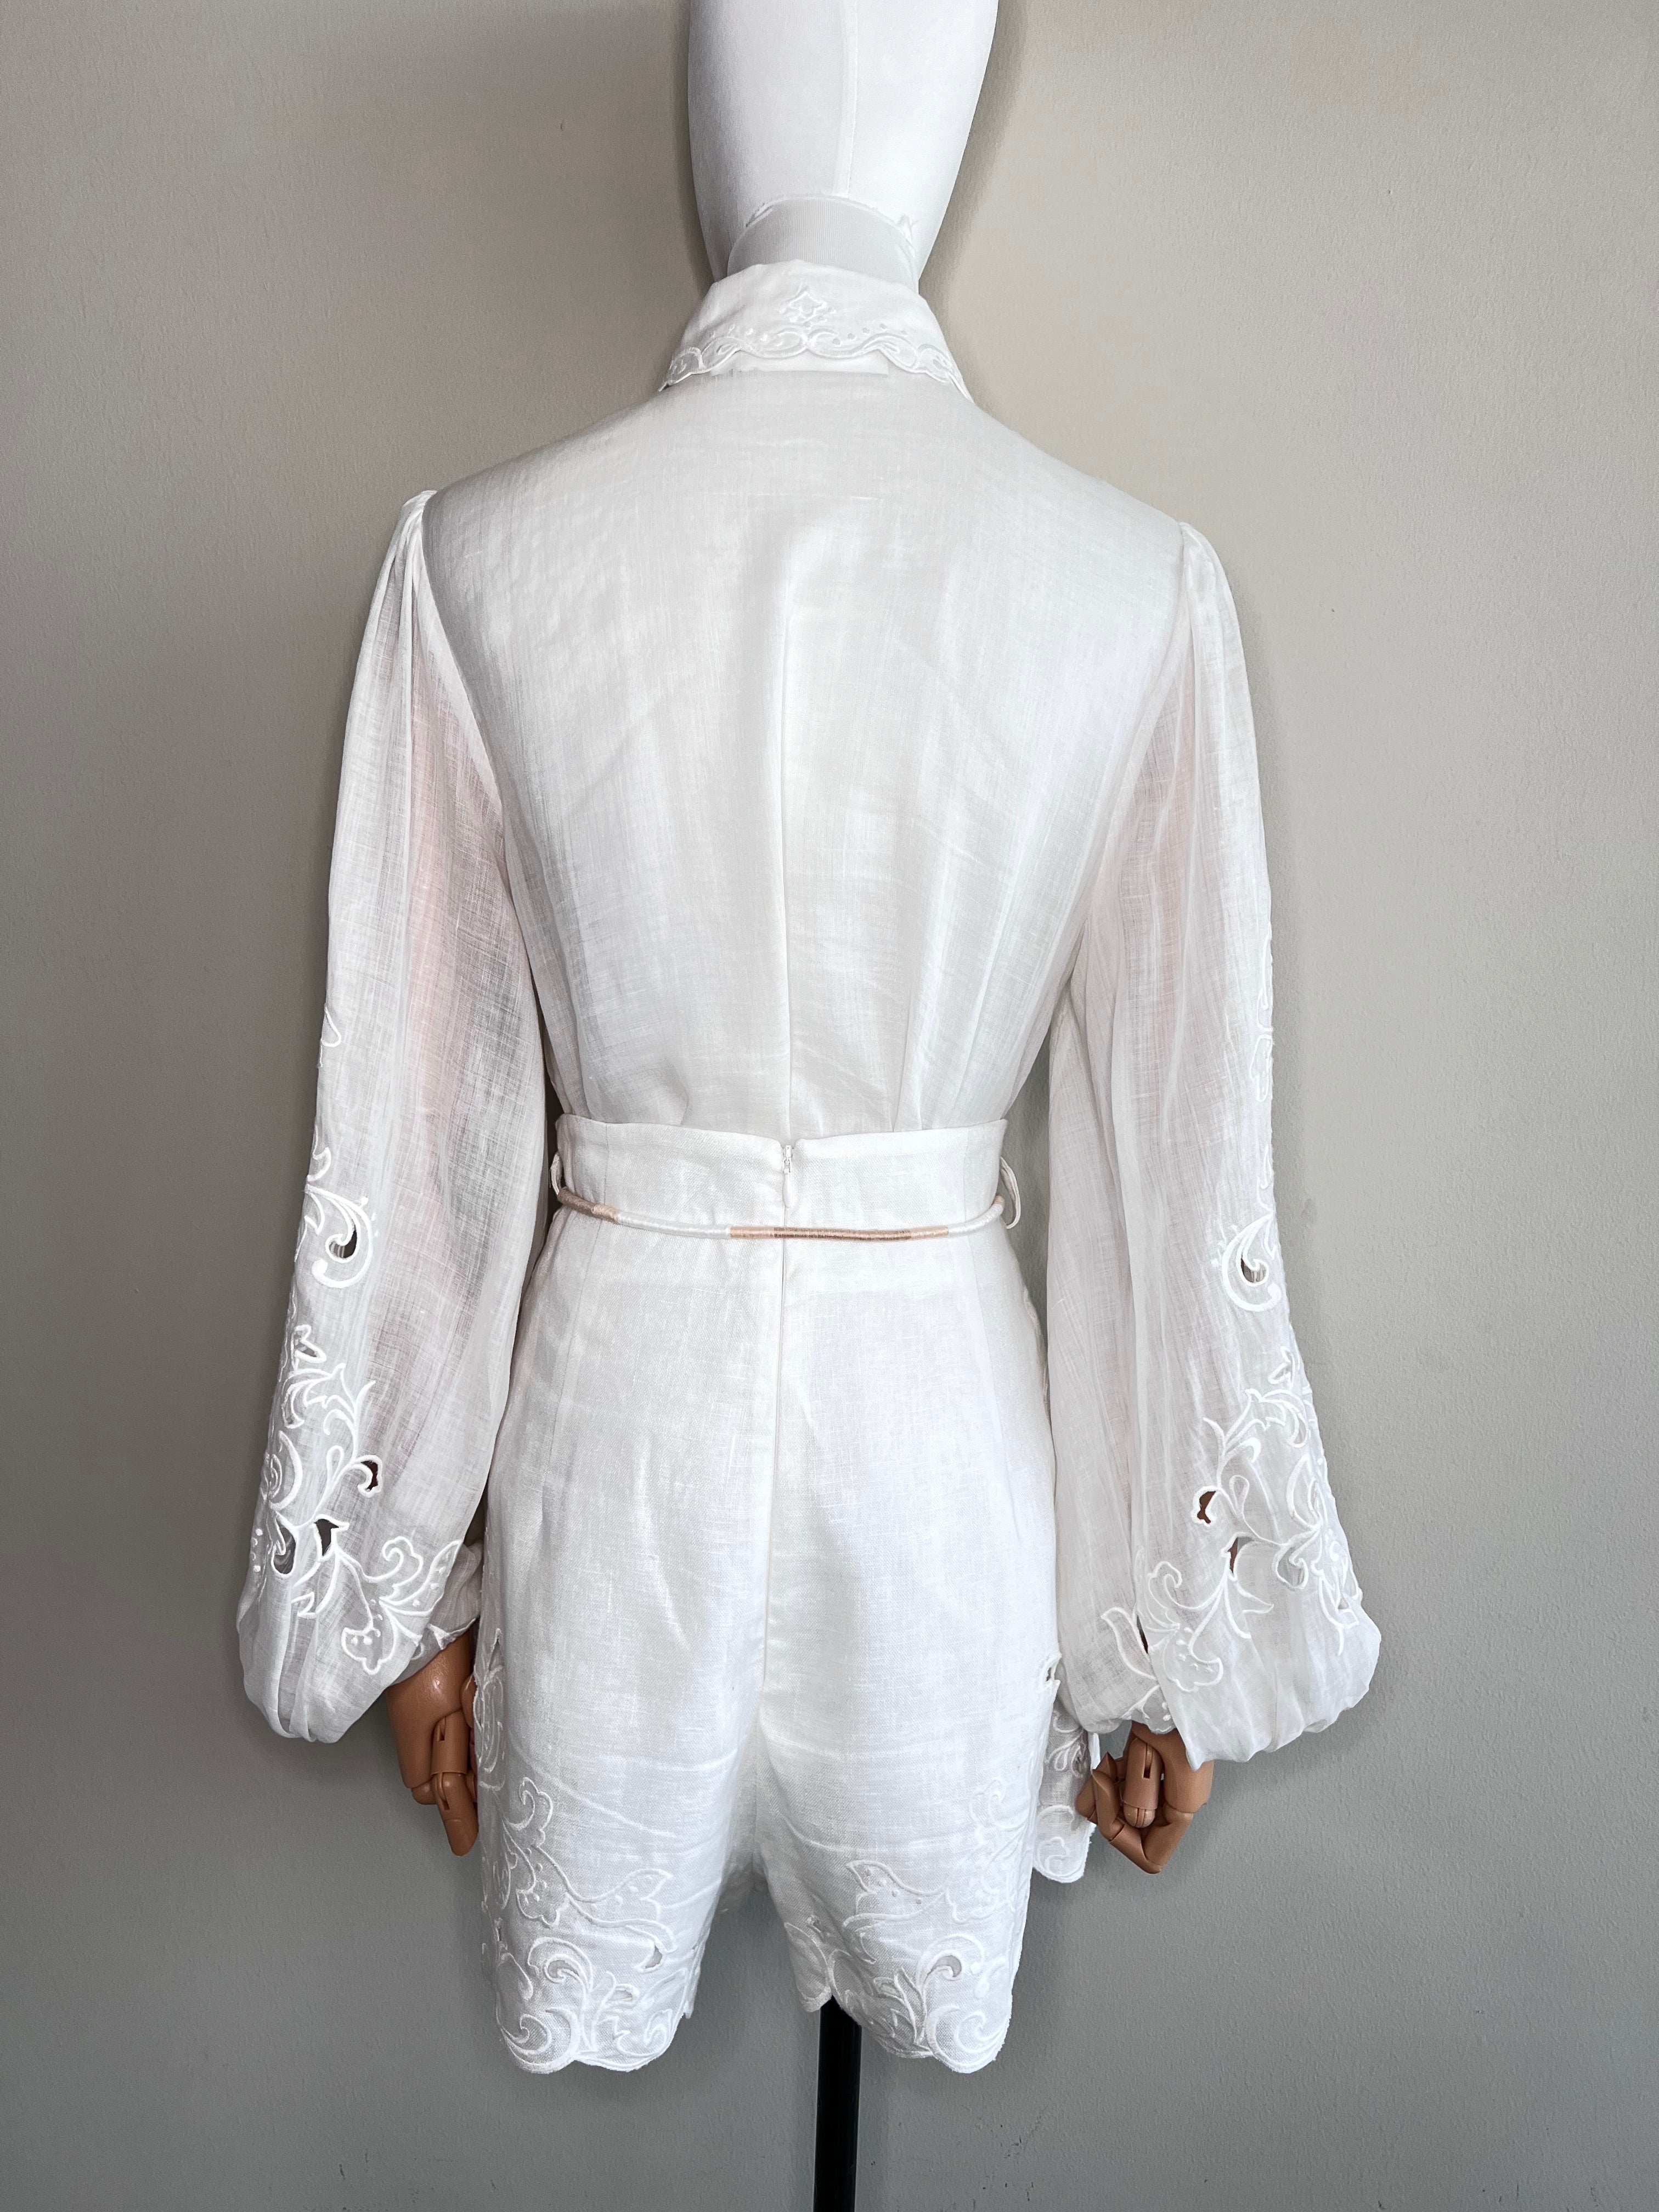 A set of white nina embroidered longsleeve and shorts - ZIMMERMANN